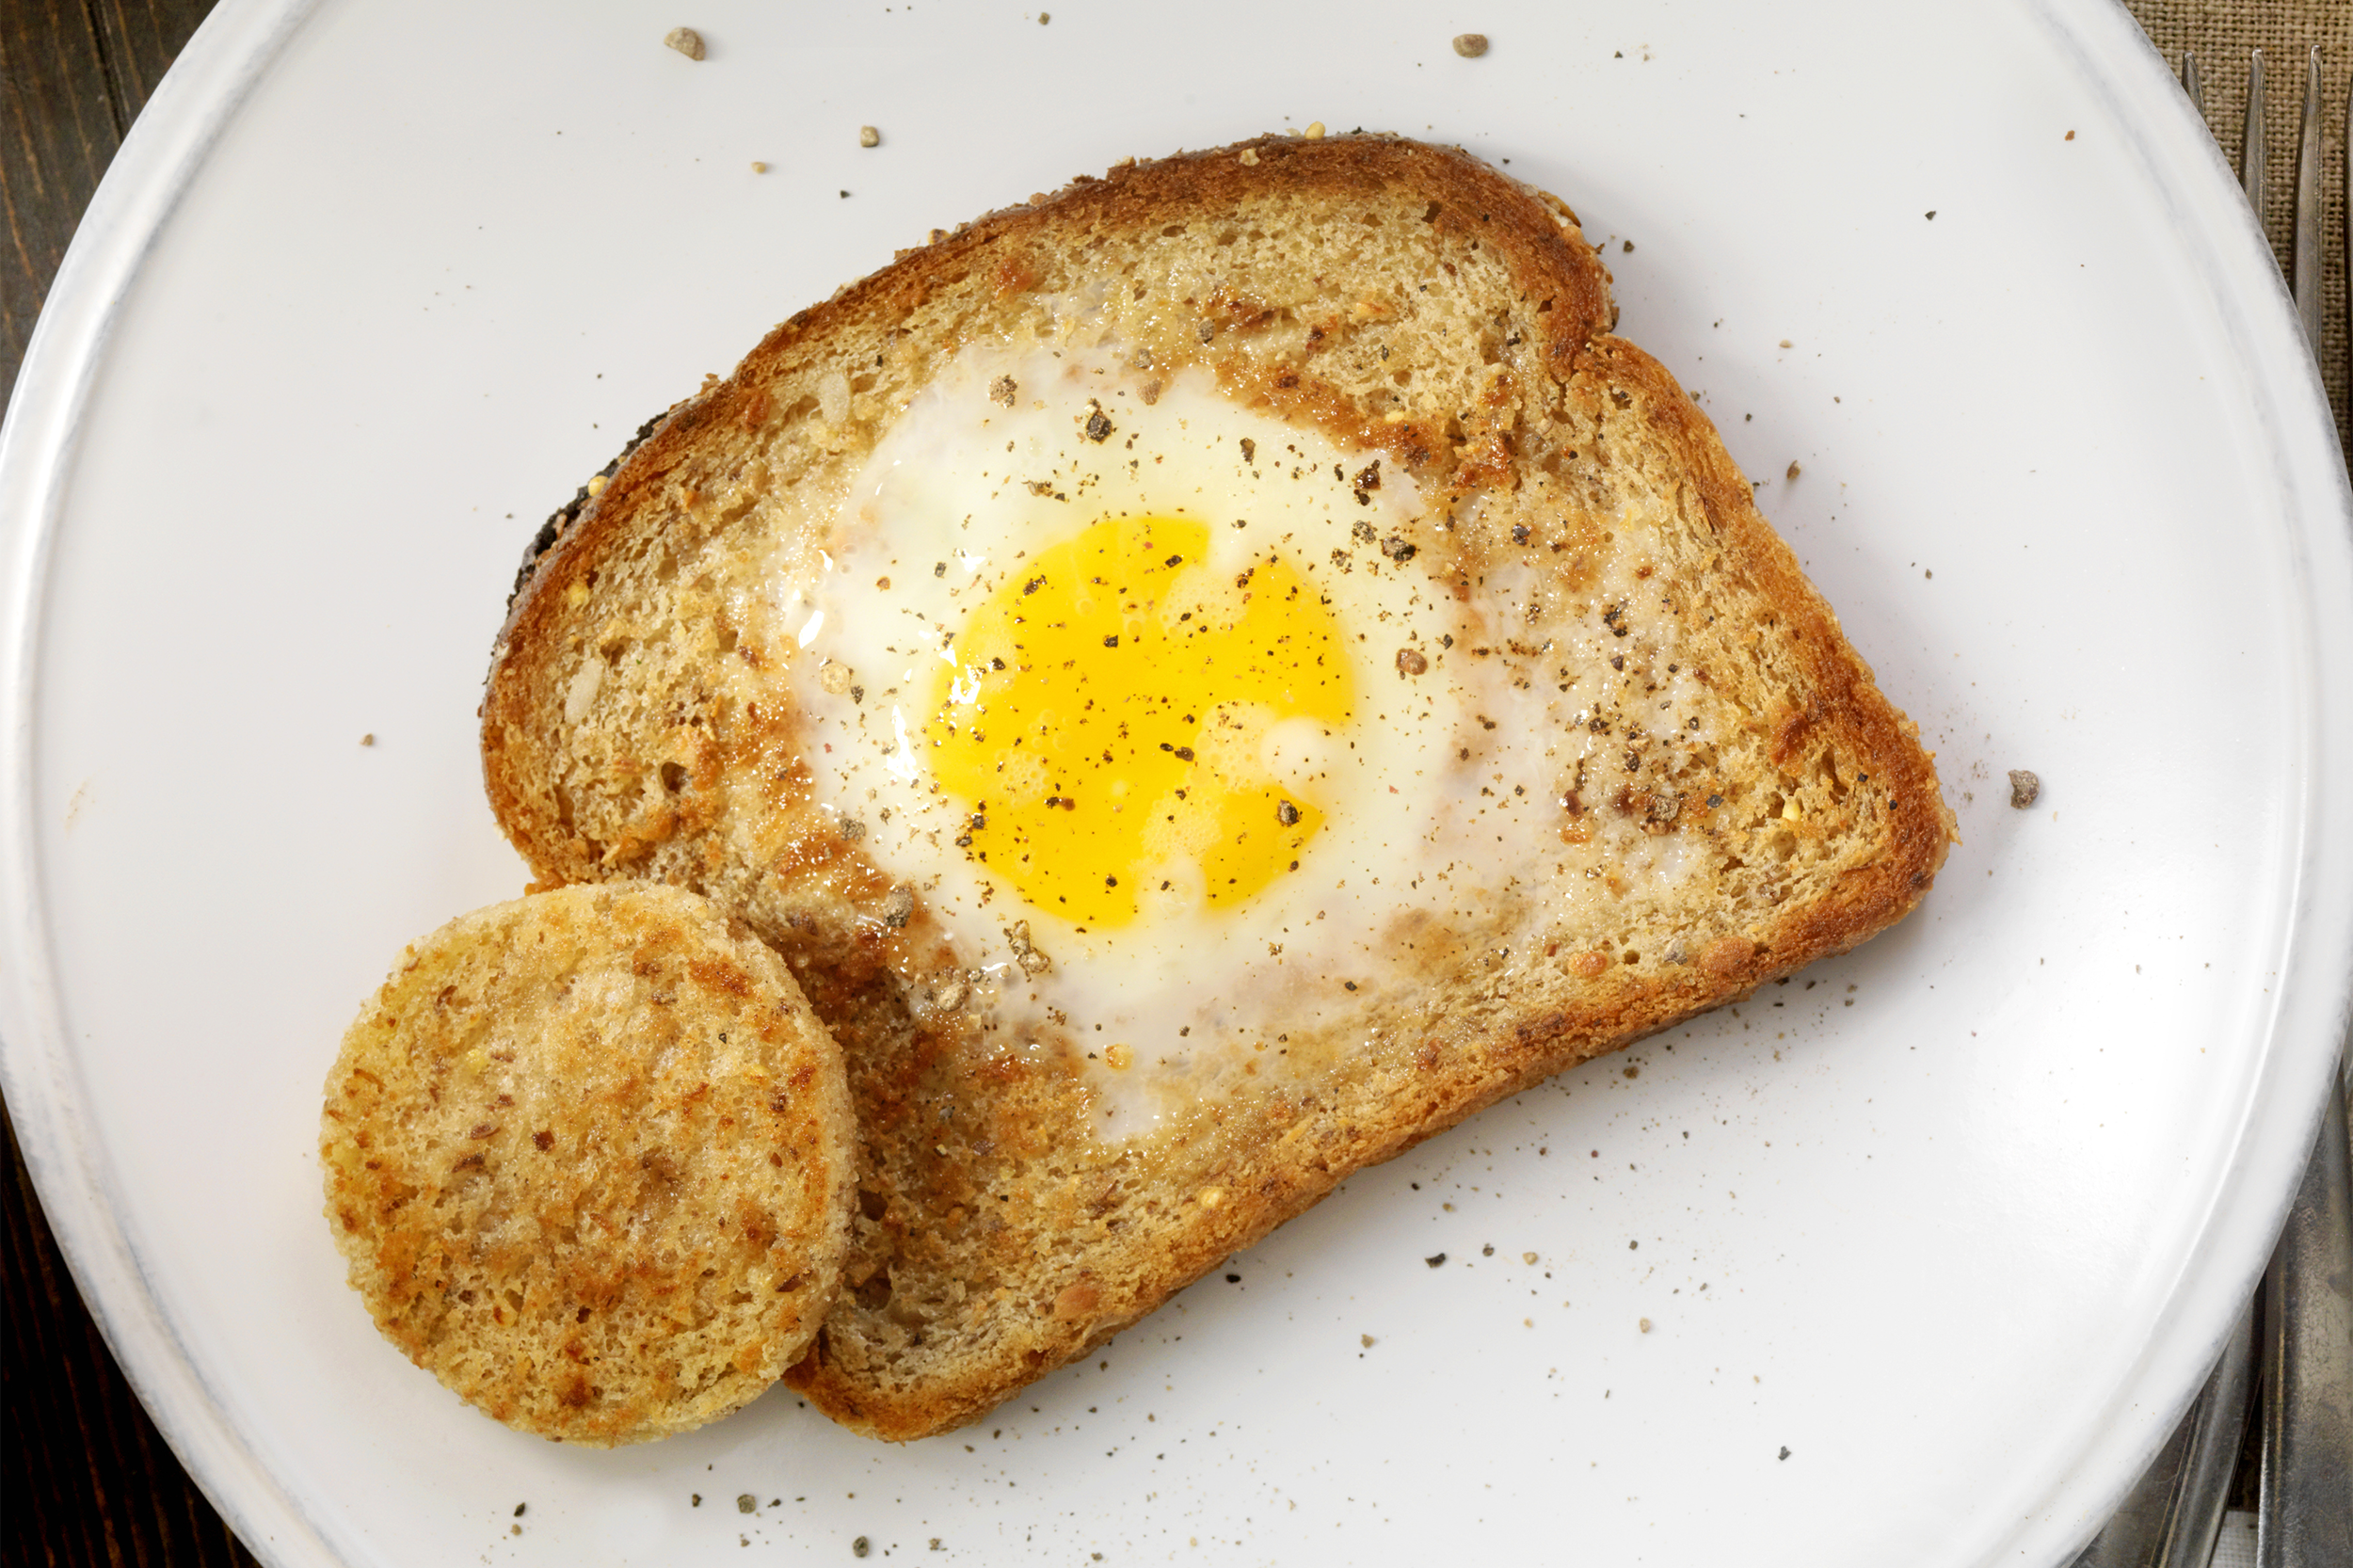 <p>It's really just another way to have toast with your eggs, but people love it: Cut a hole in bread, toast each side in a lightly oiled skillet, break eggs into each hole, cover the pan to let it sit for roughly five minutes so the eggs set. Salt and pepper to taste afterward.</p>